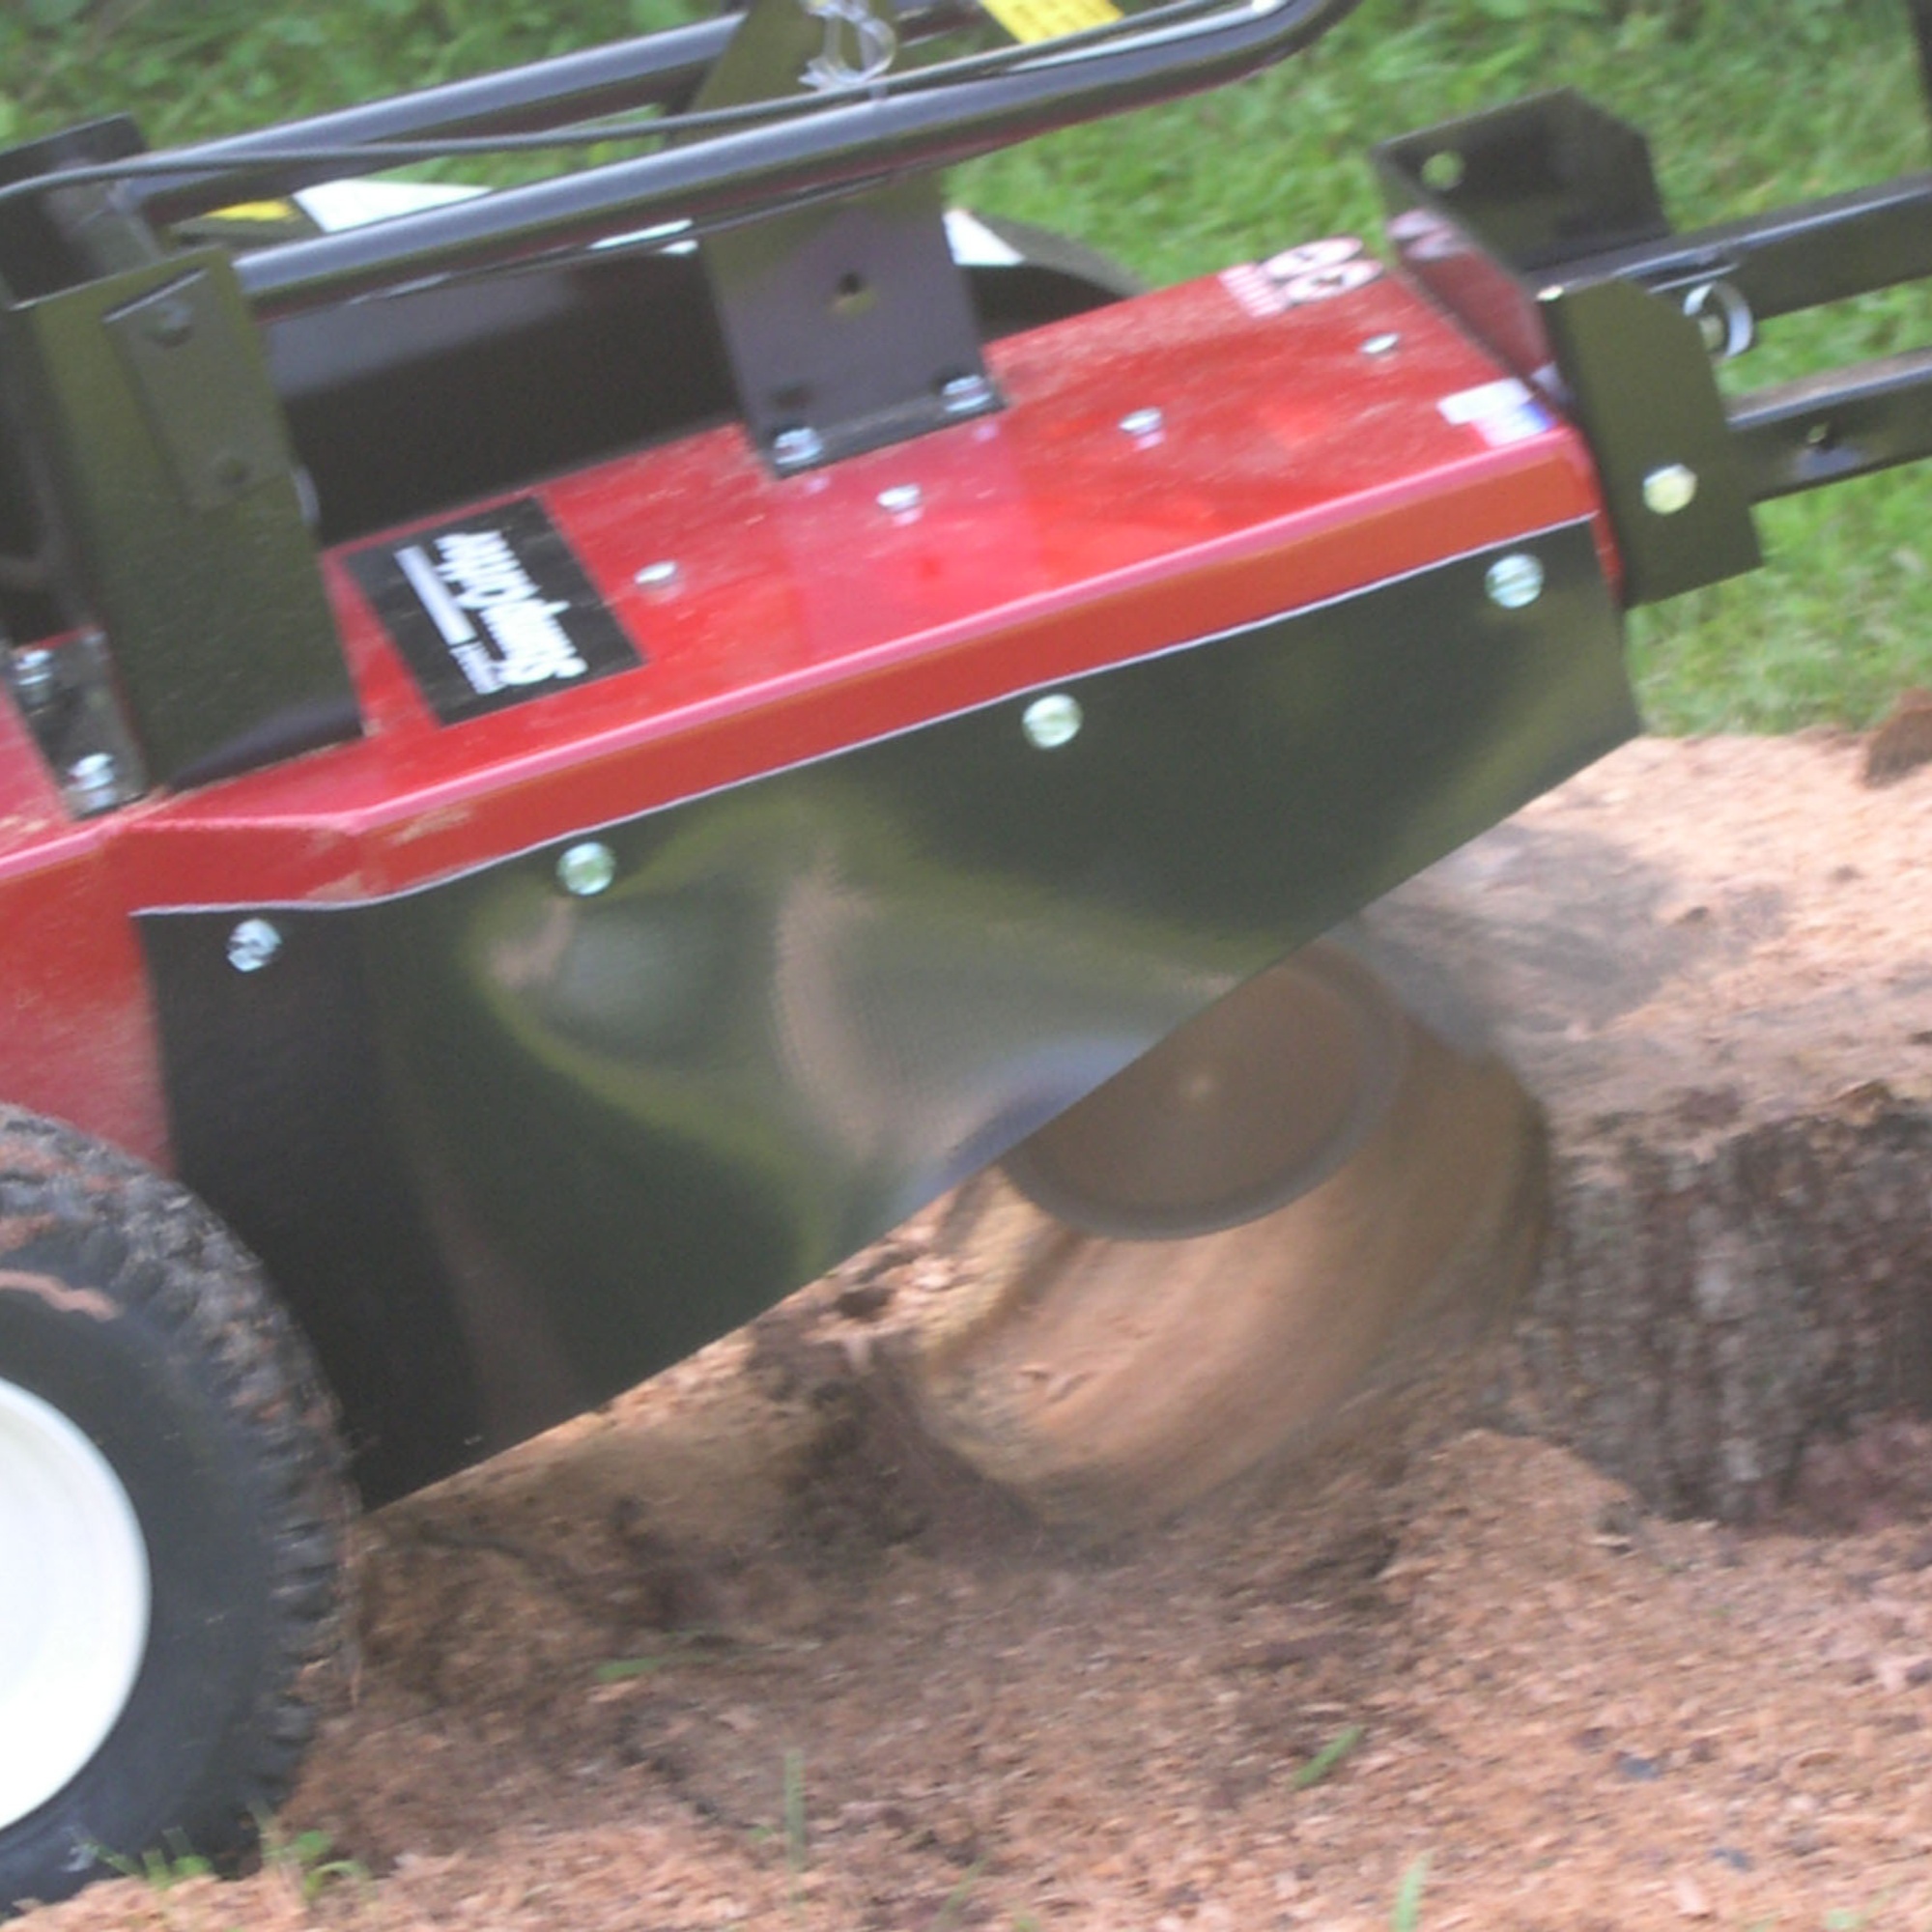 stump cutter at work - stump being grinded by the Merry Commercial machine